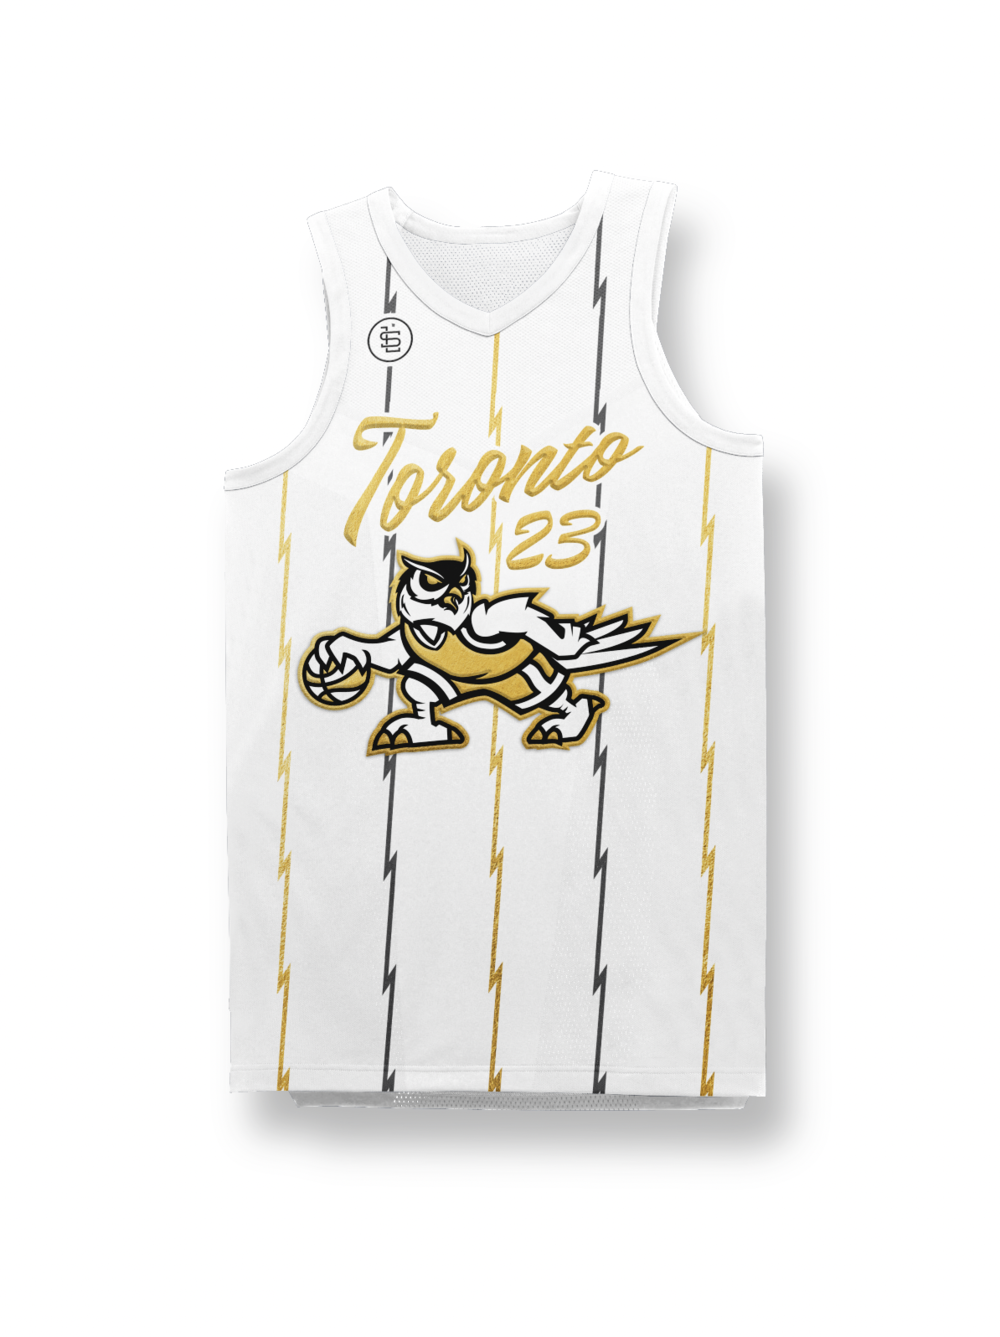 white and gold toronto raptors jersey